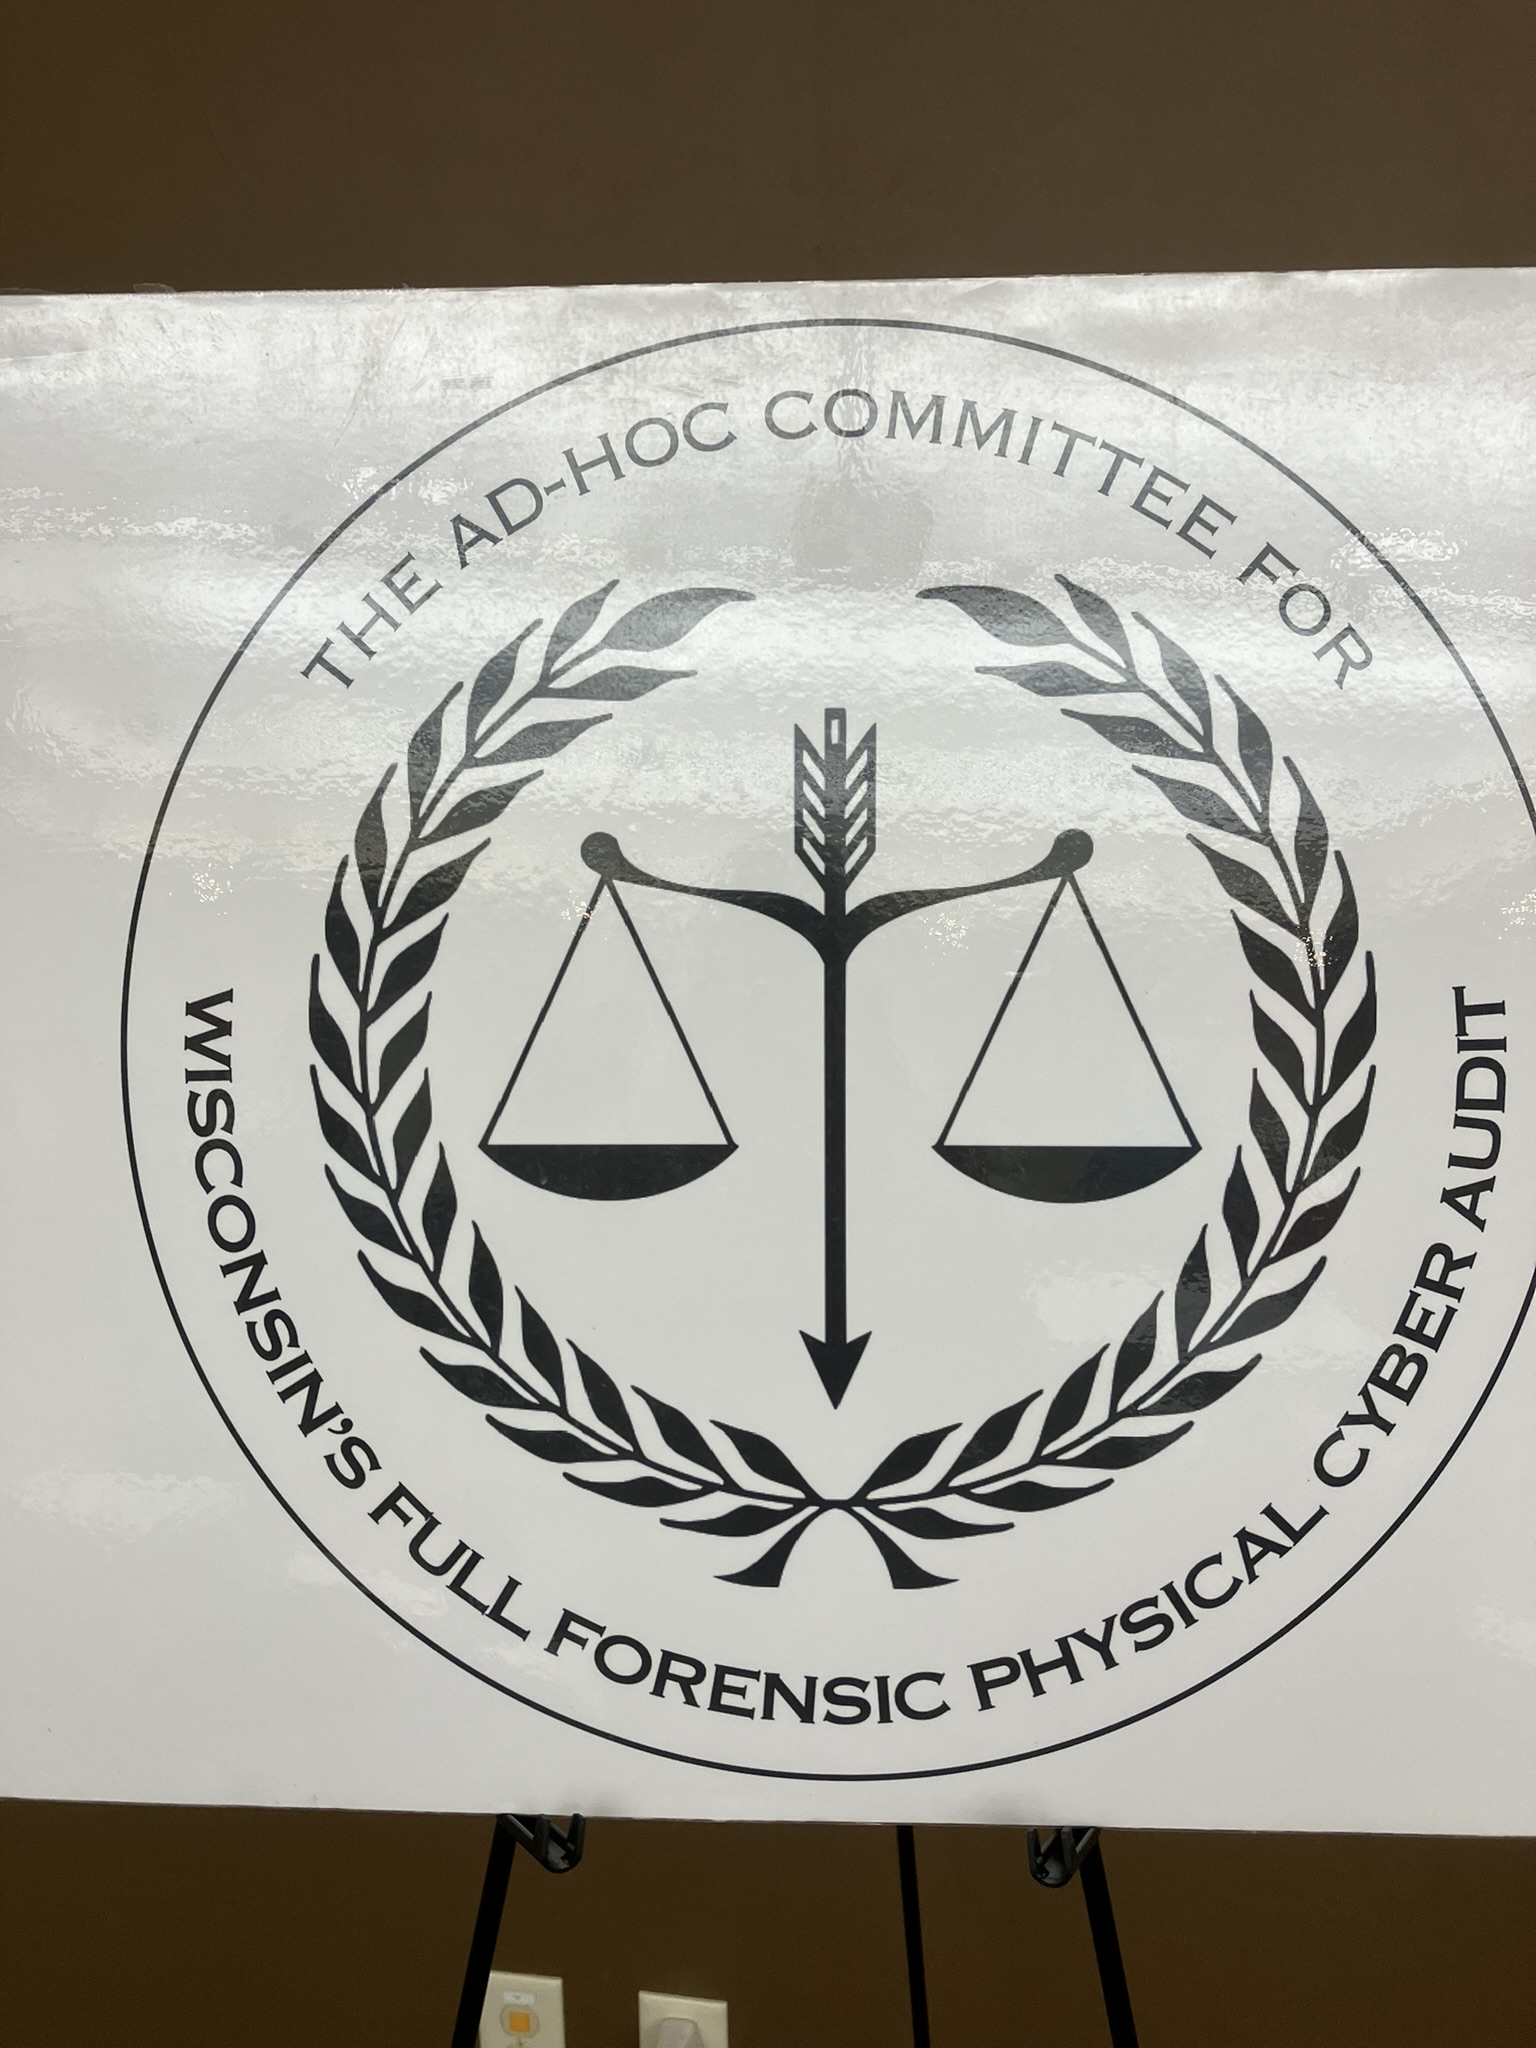 Logo for the The Ad-Hoc Committee for Wisconsin's Full Forensic Physical Cyber Audit